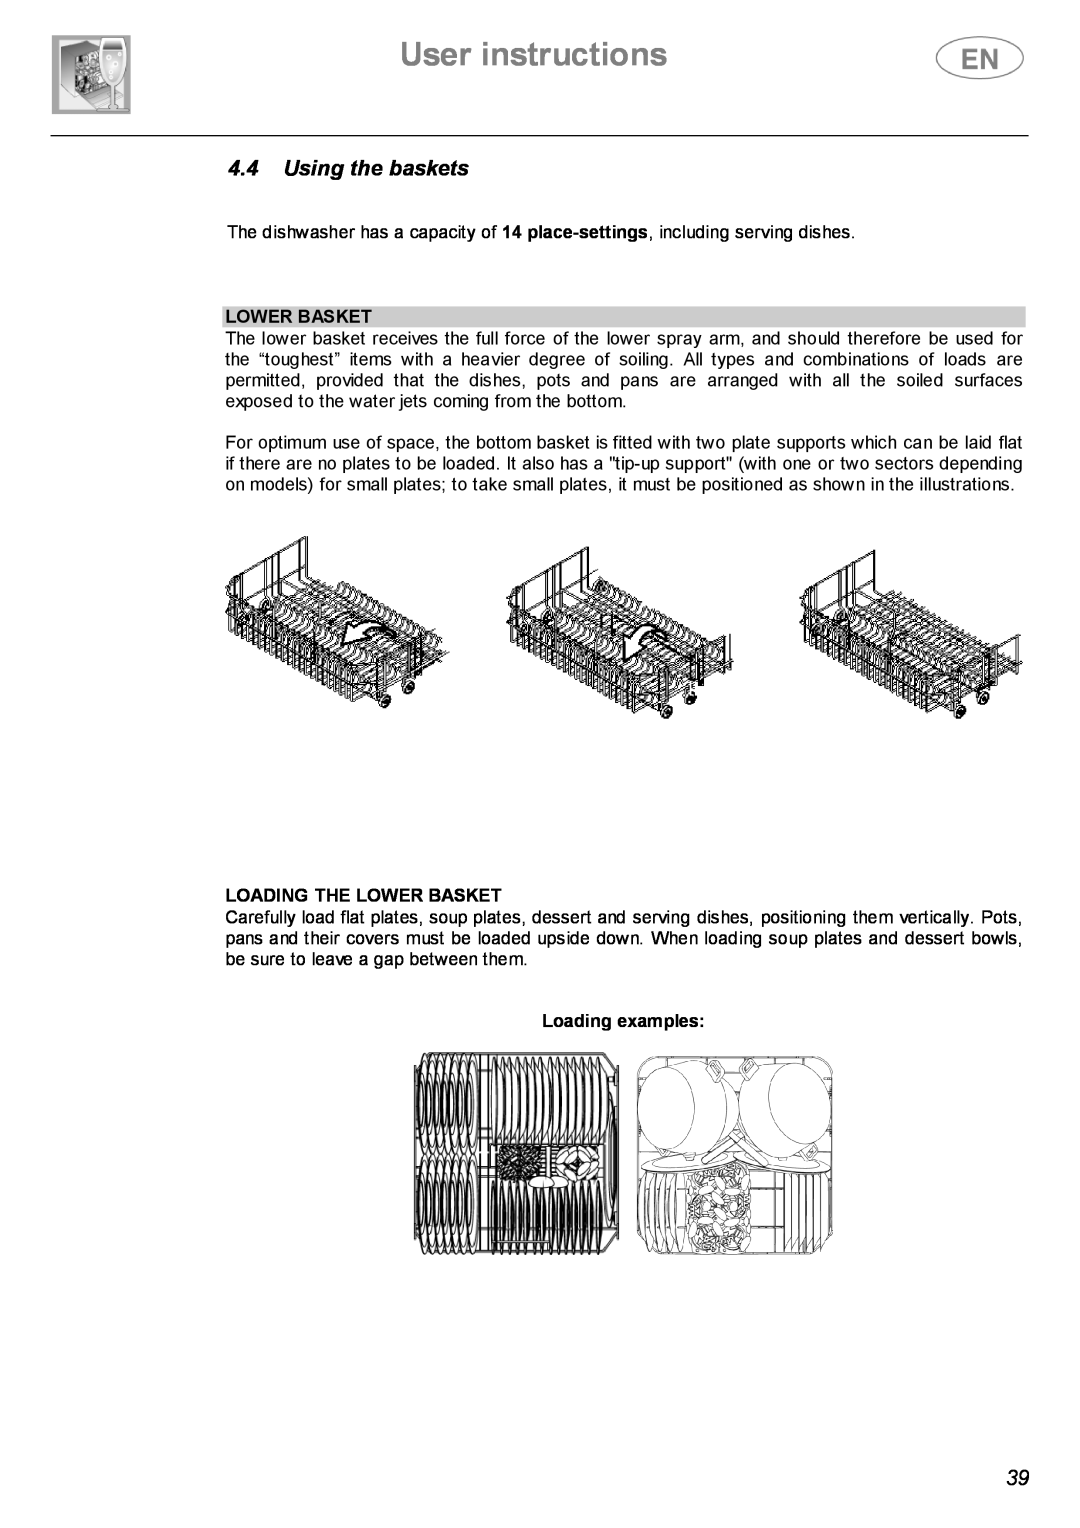 Smeg ST143 instruction manual Using the baskets, Loading The Lower Basket, Loading examples, User instructions 